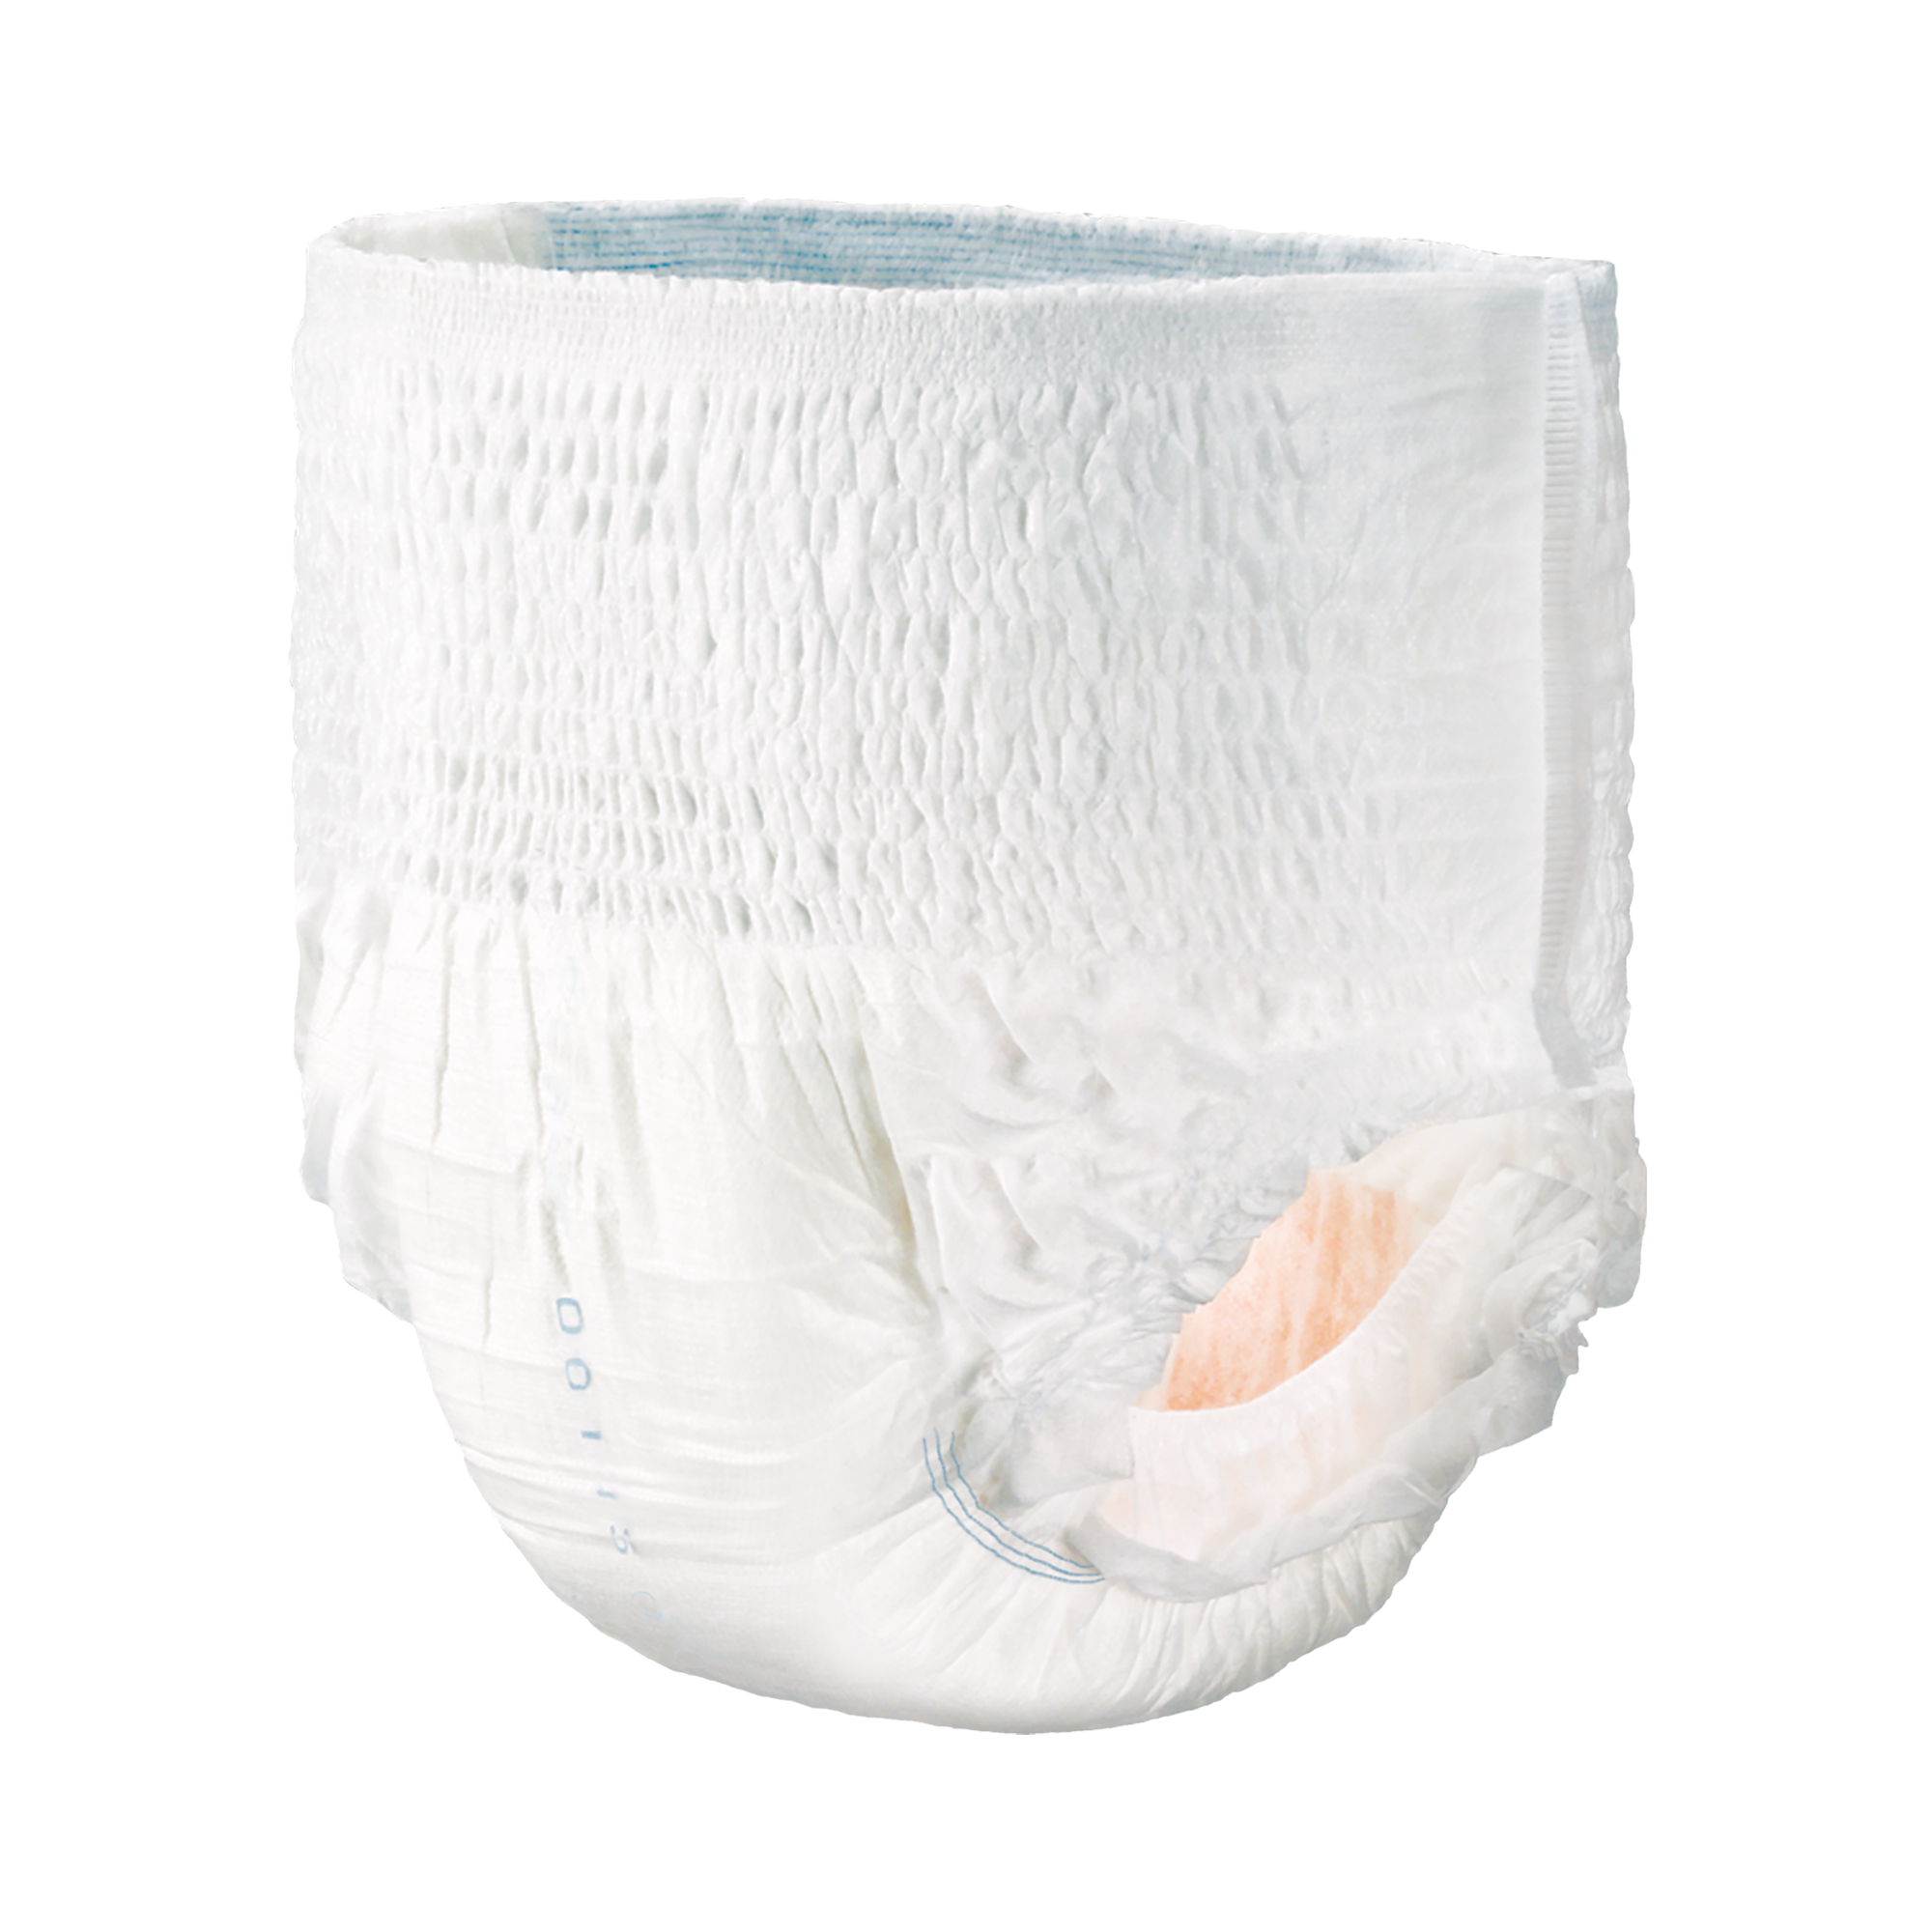 Youth & Teen Diapers  Tranquility Incontinence Products